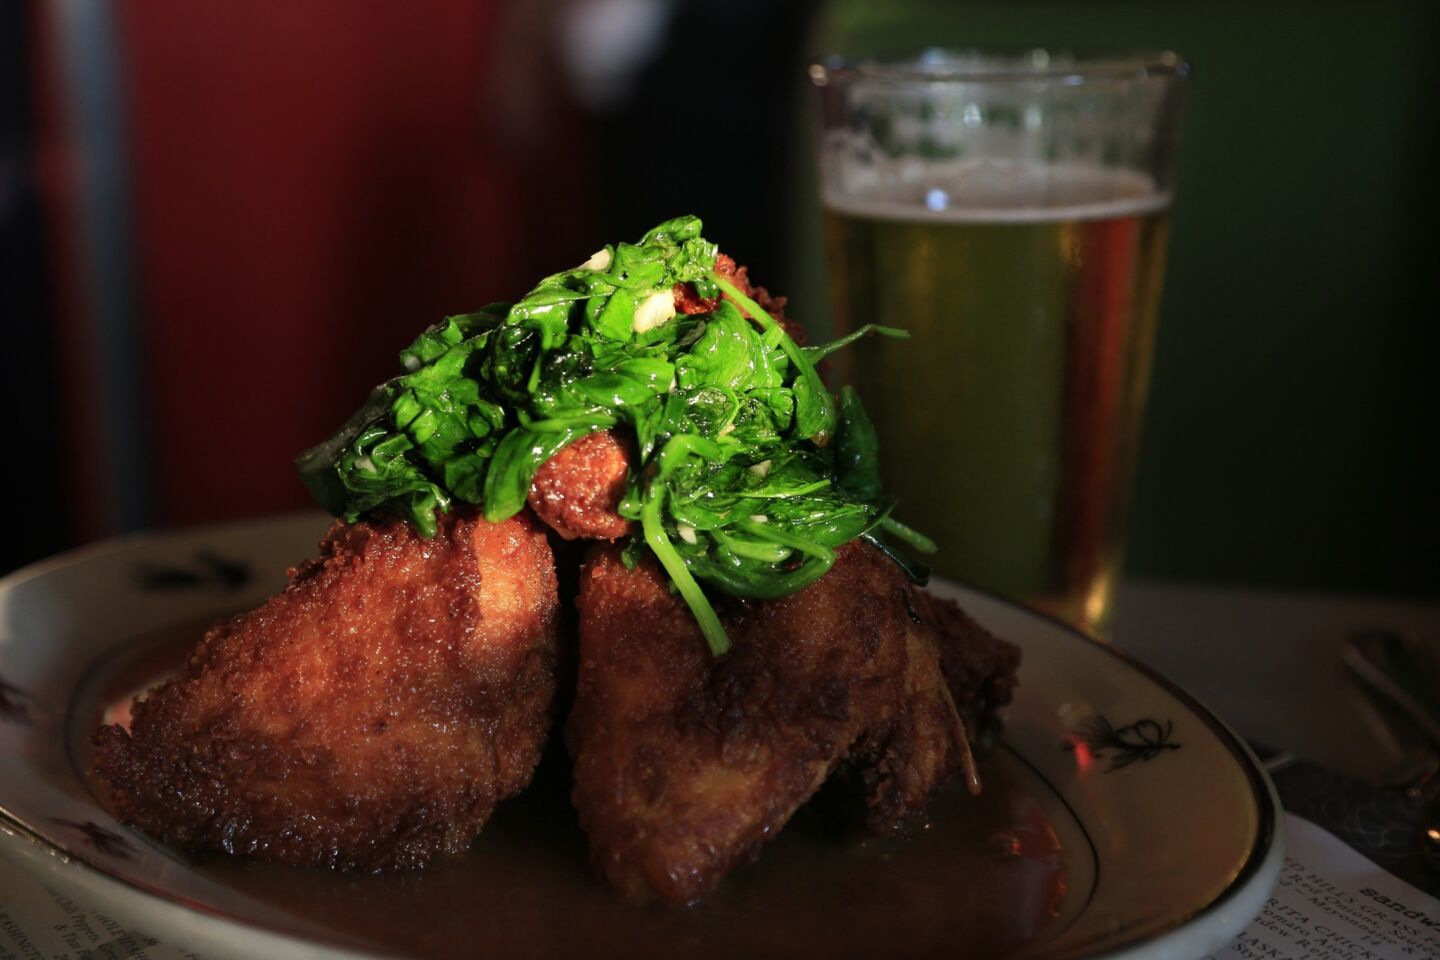 Southern fried chicken topped with sauteed spinach is served with brown gravy at the Steelhead Diner at Pike Place Market off Post Alley.